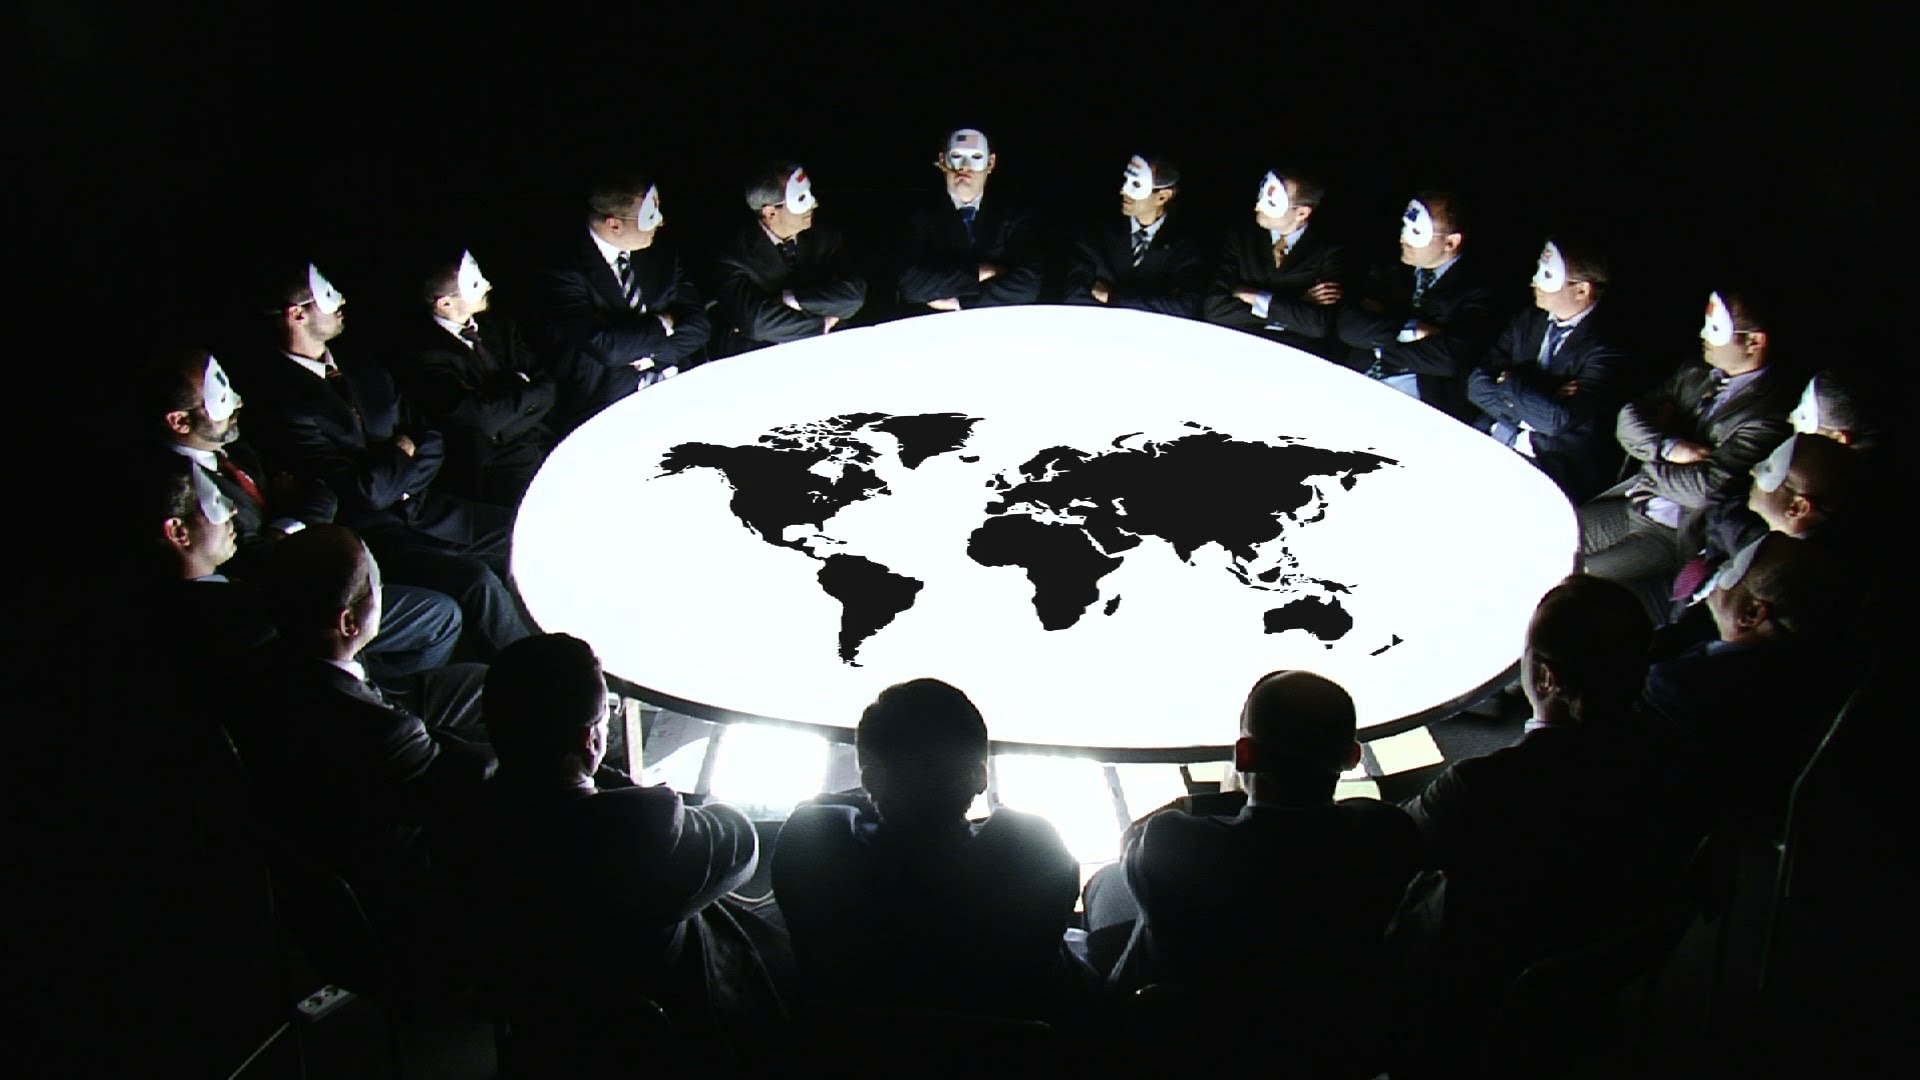 committee-of-new-world-order